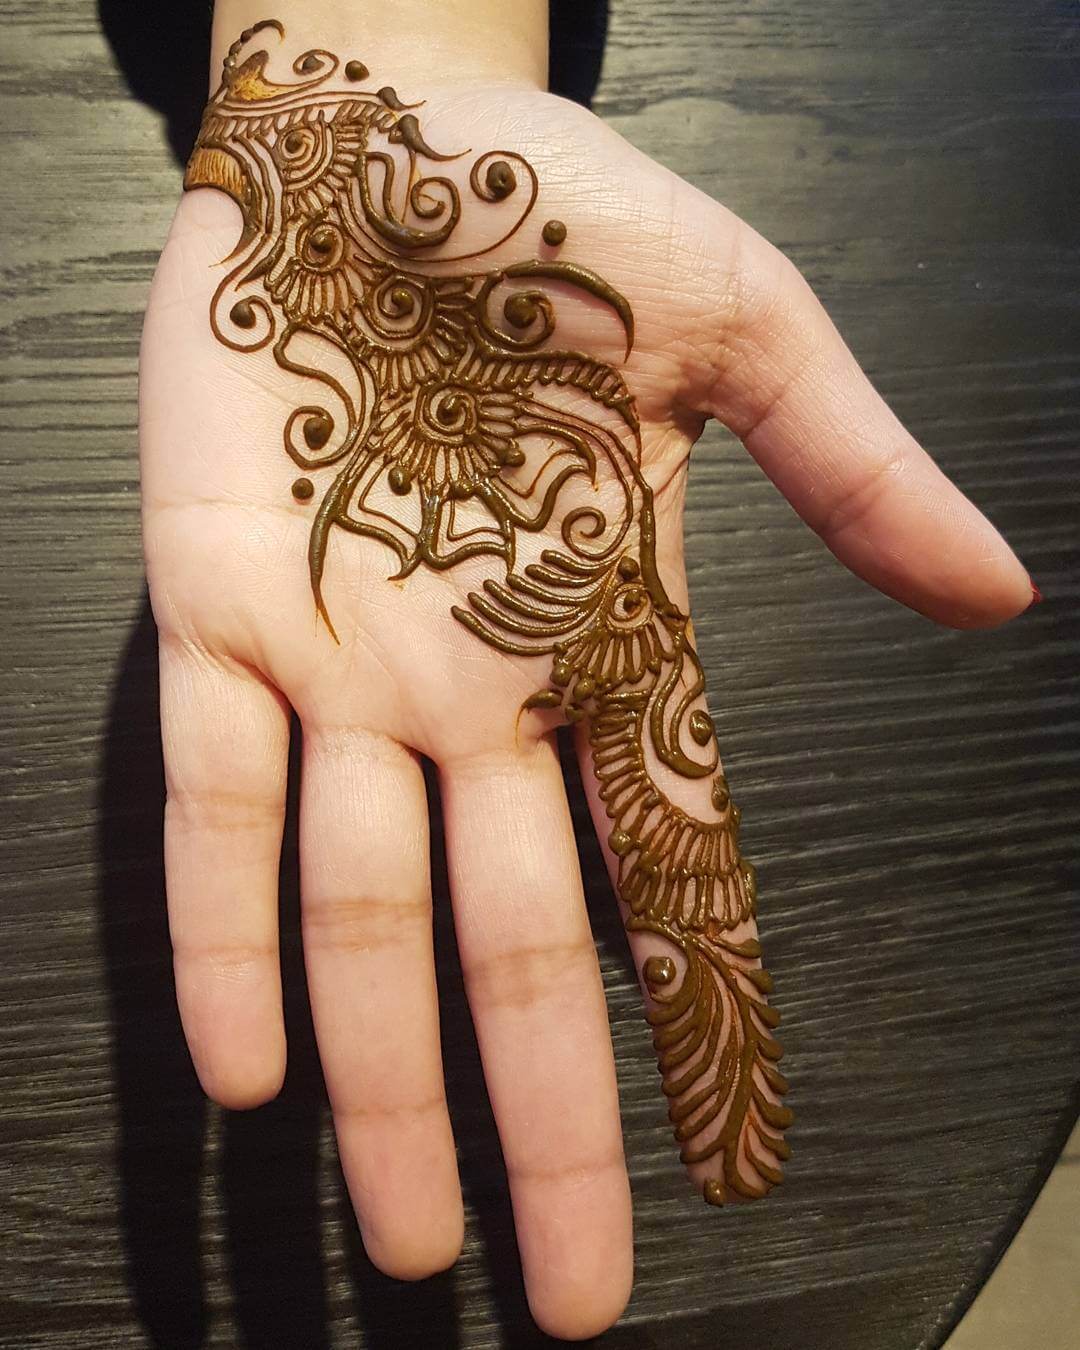 75 Small Mehndi Designs For Front Hand, For Kids, & Simple! - Wedbook